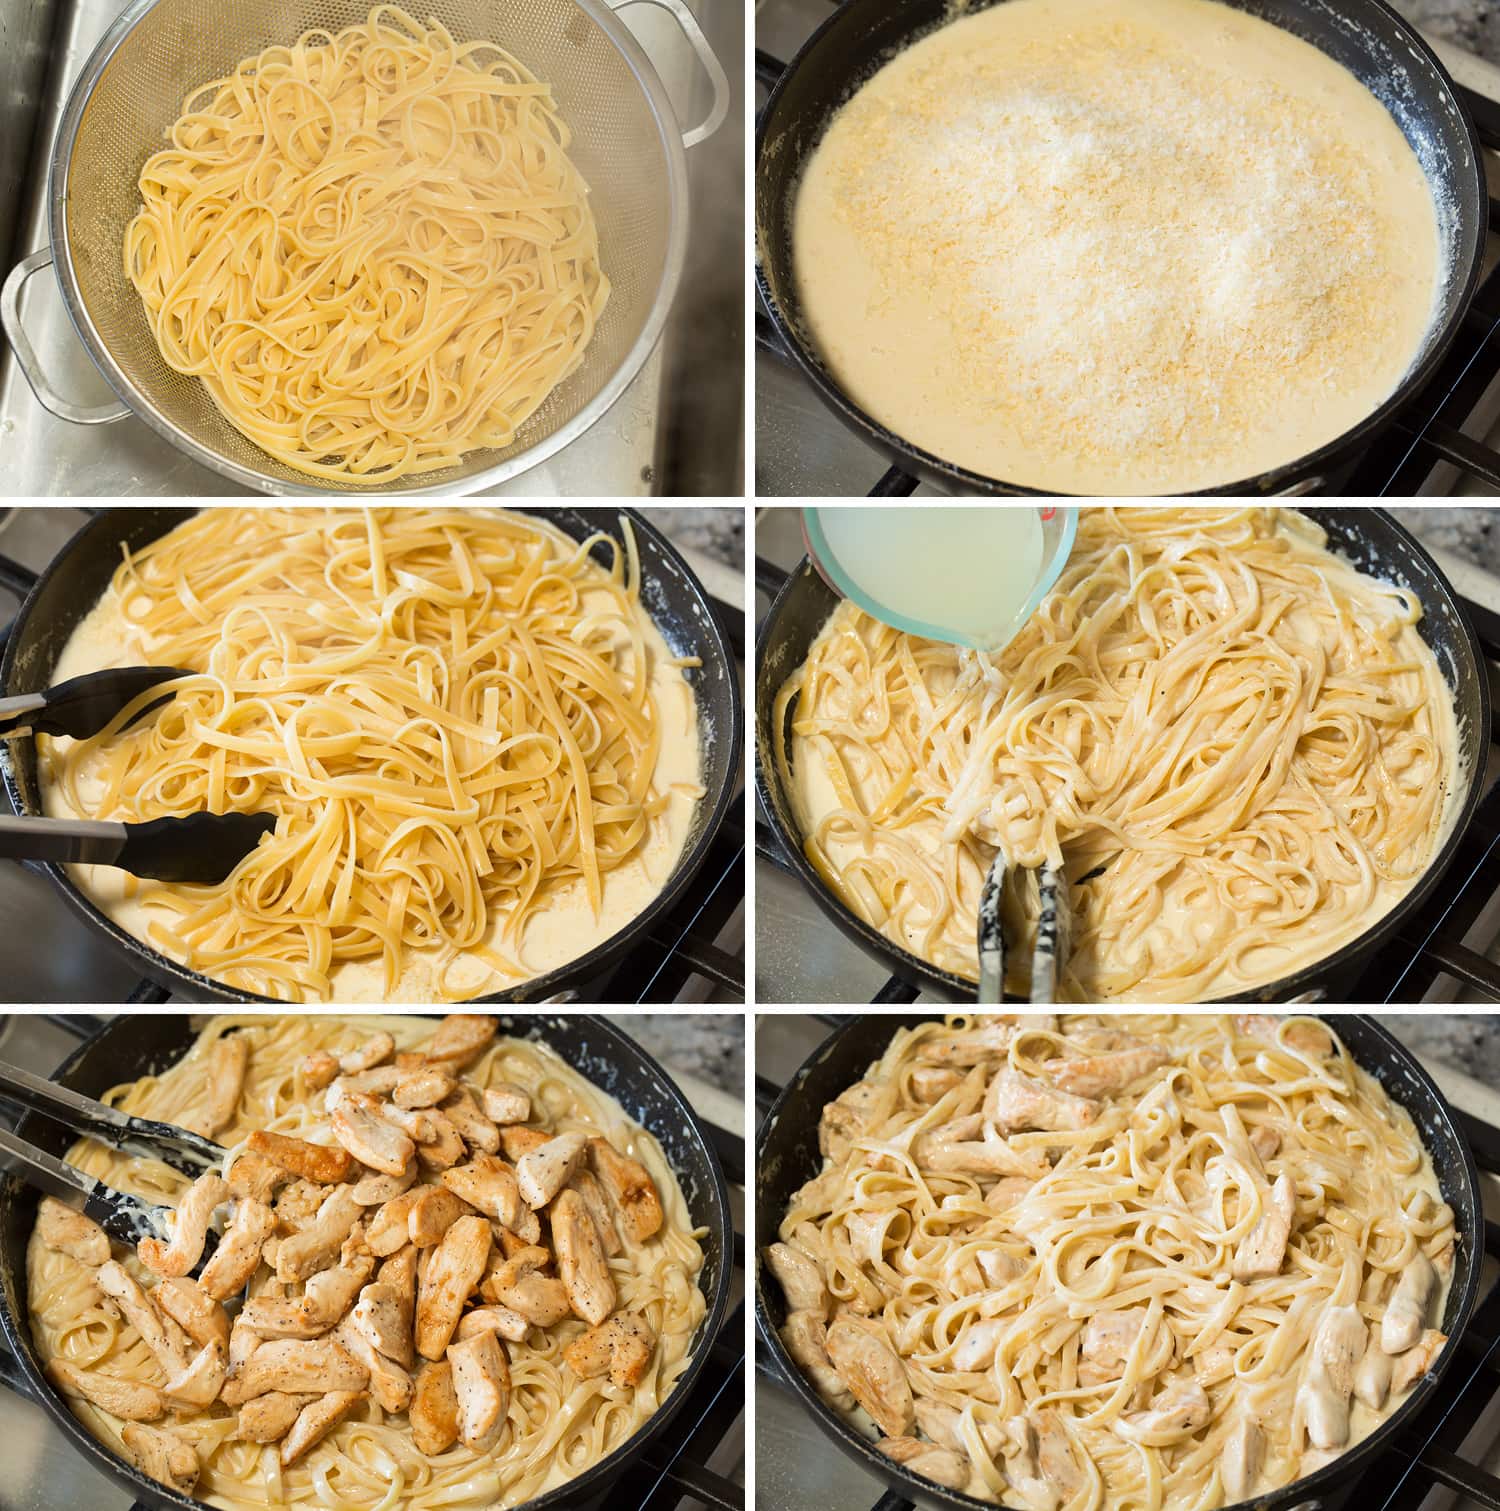 Continued steps of making chicken alfredo in skillet.